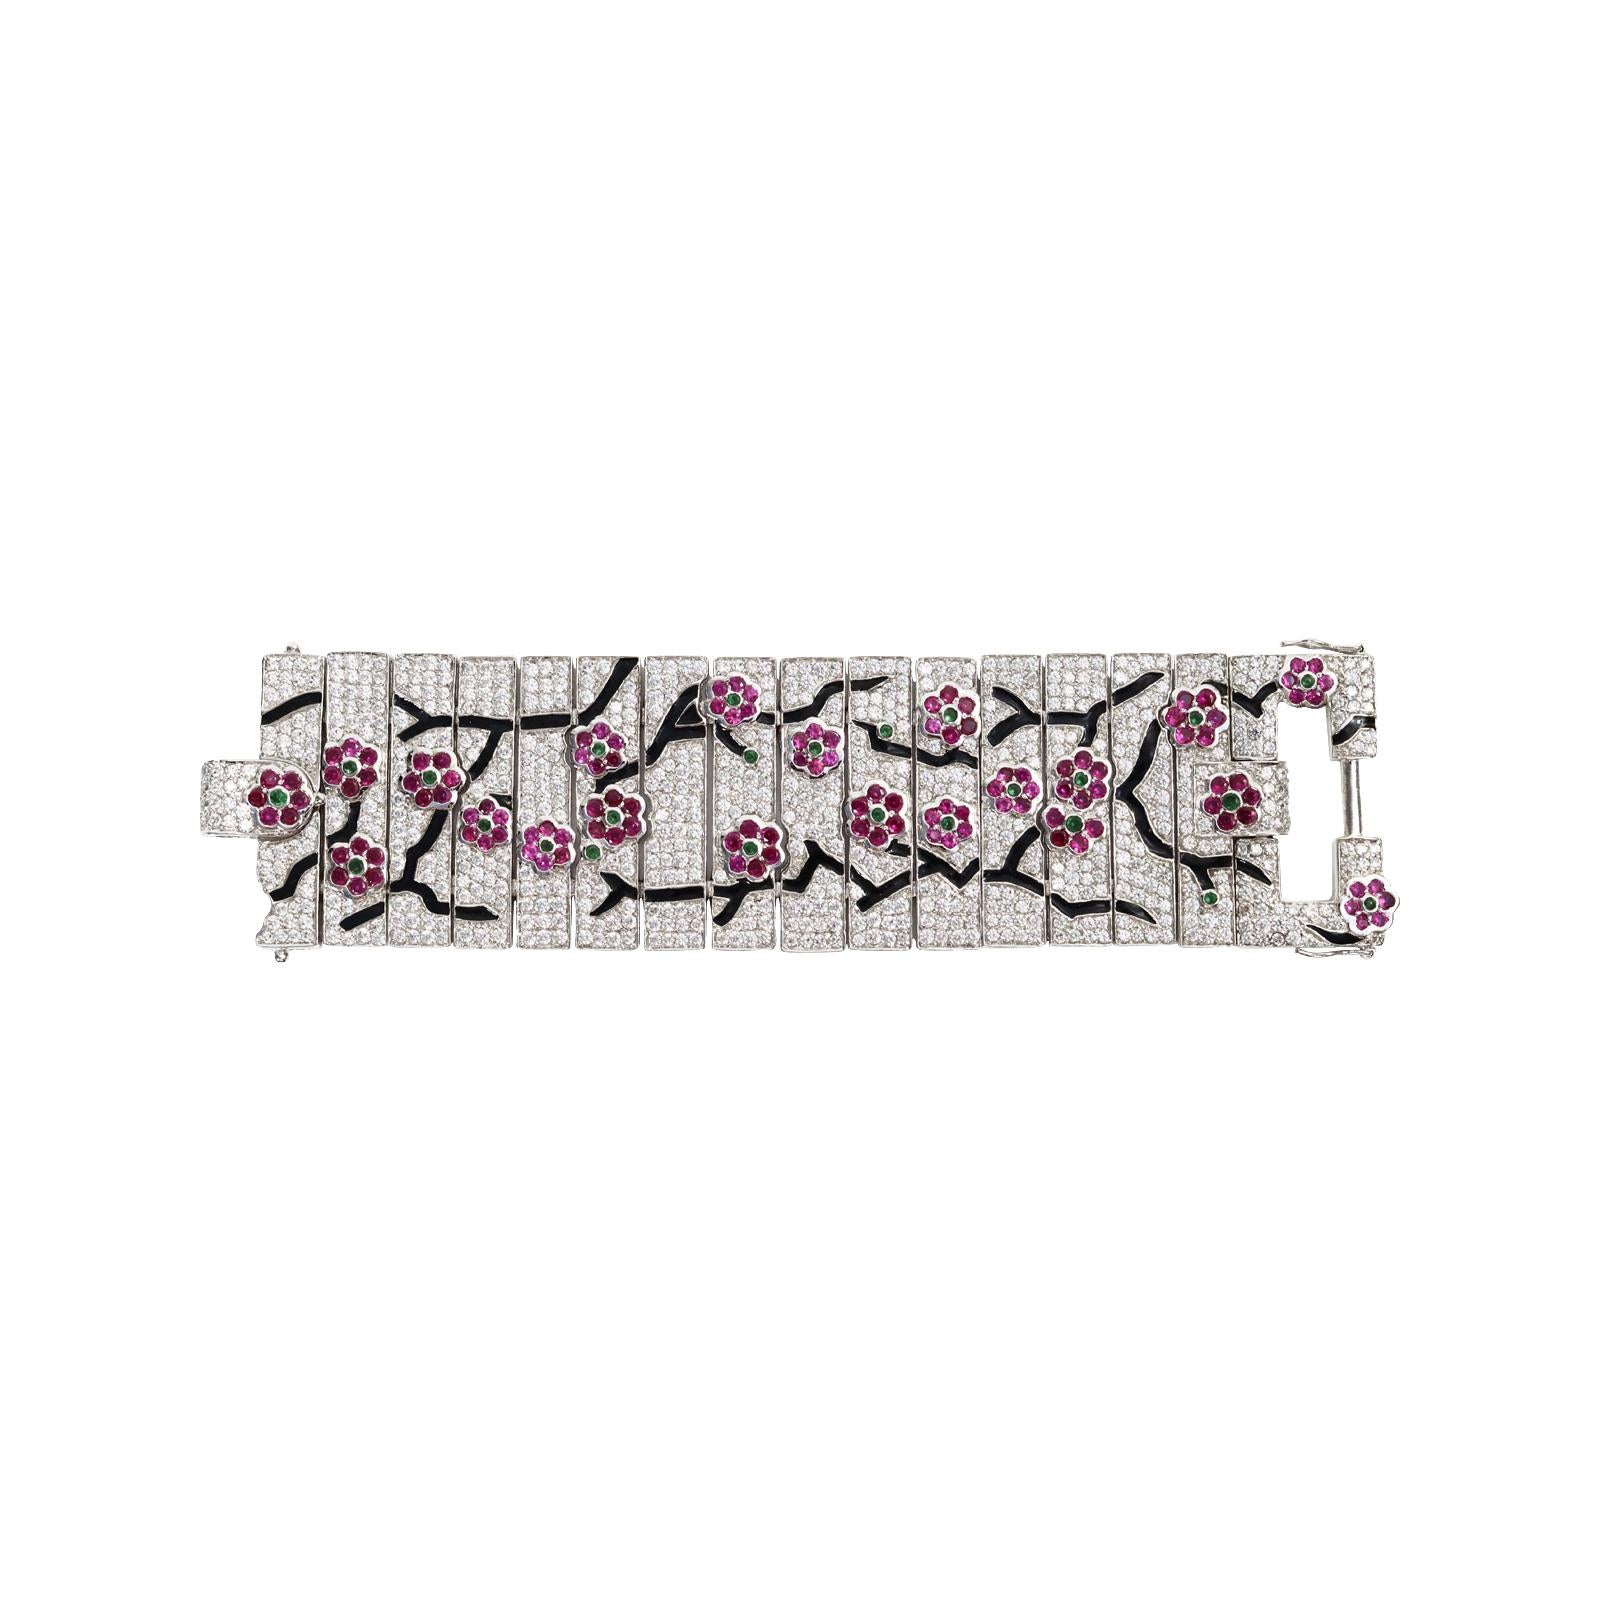 Vintage Jarin Art Deco Diamante Flower Bracelet Circa 2000s. So stunning. Looks like a Japanese garden.  There are bars of pave which have black enamel on top of them and then there are pink diamante flowers on top of that. It is a wide bracelet and